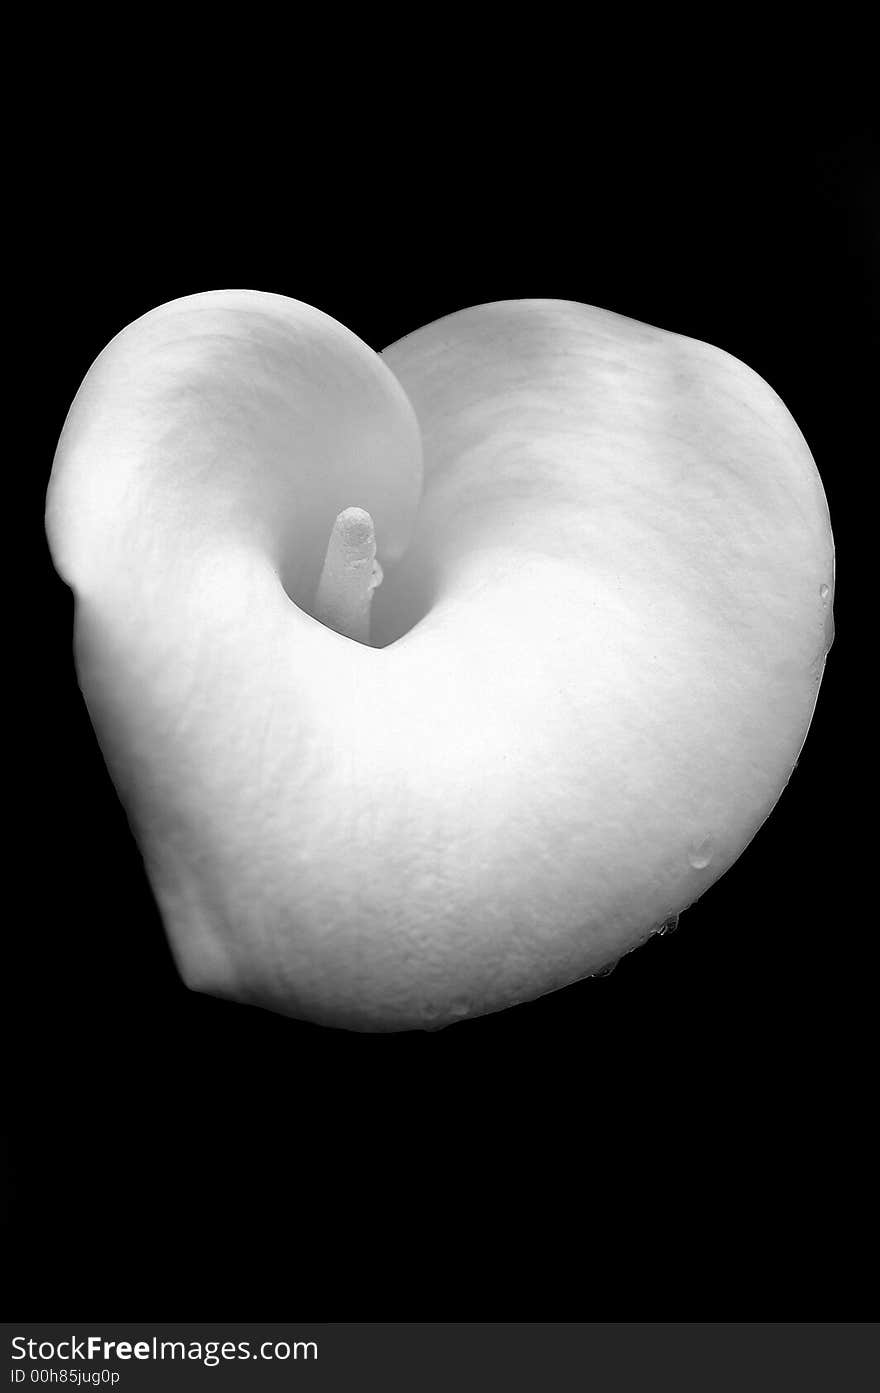 Dew Kissed Calla Lily Against Black Background. Dew Kissed Calla Lily Against Black Background